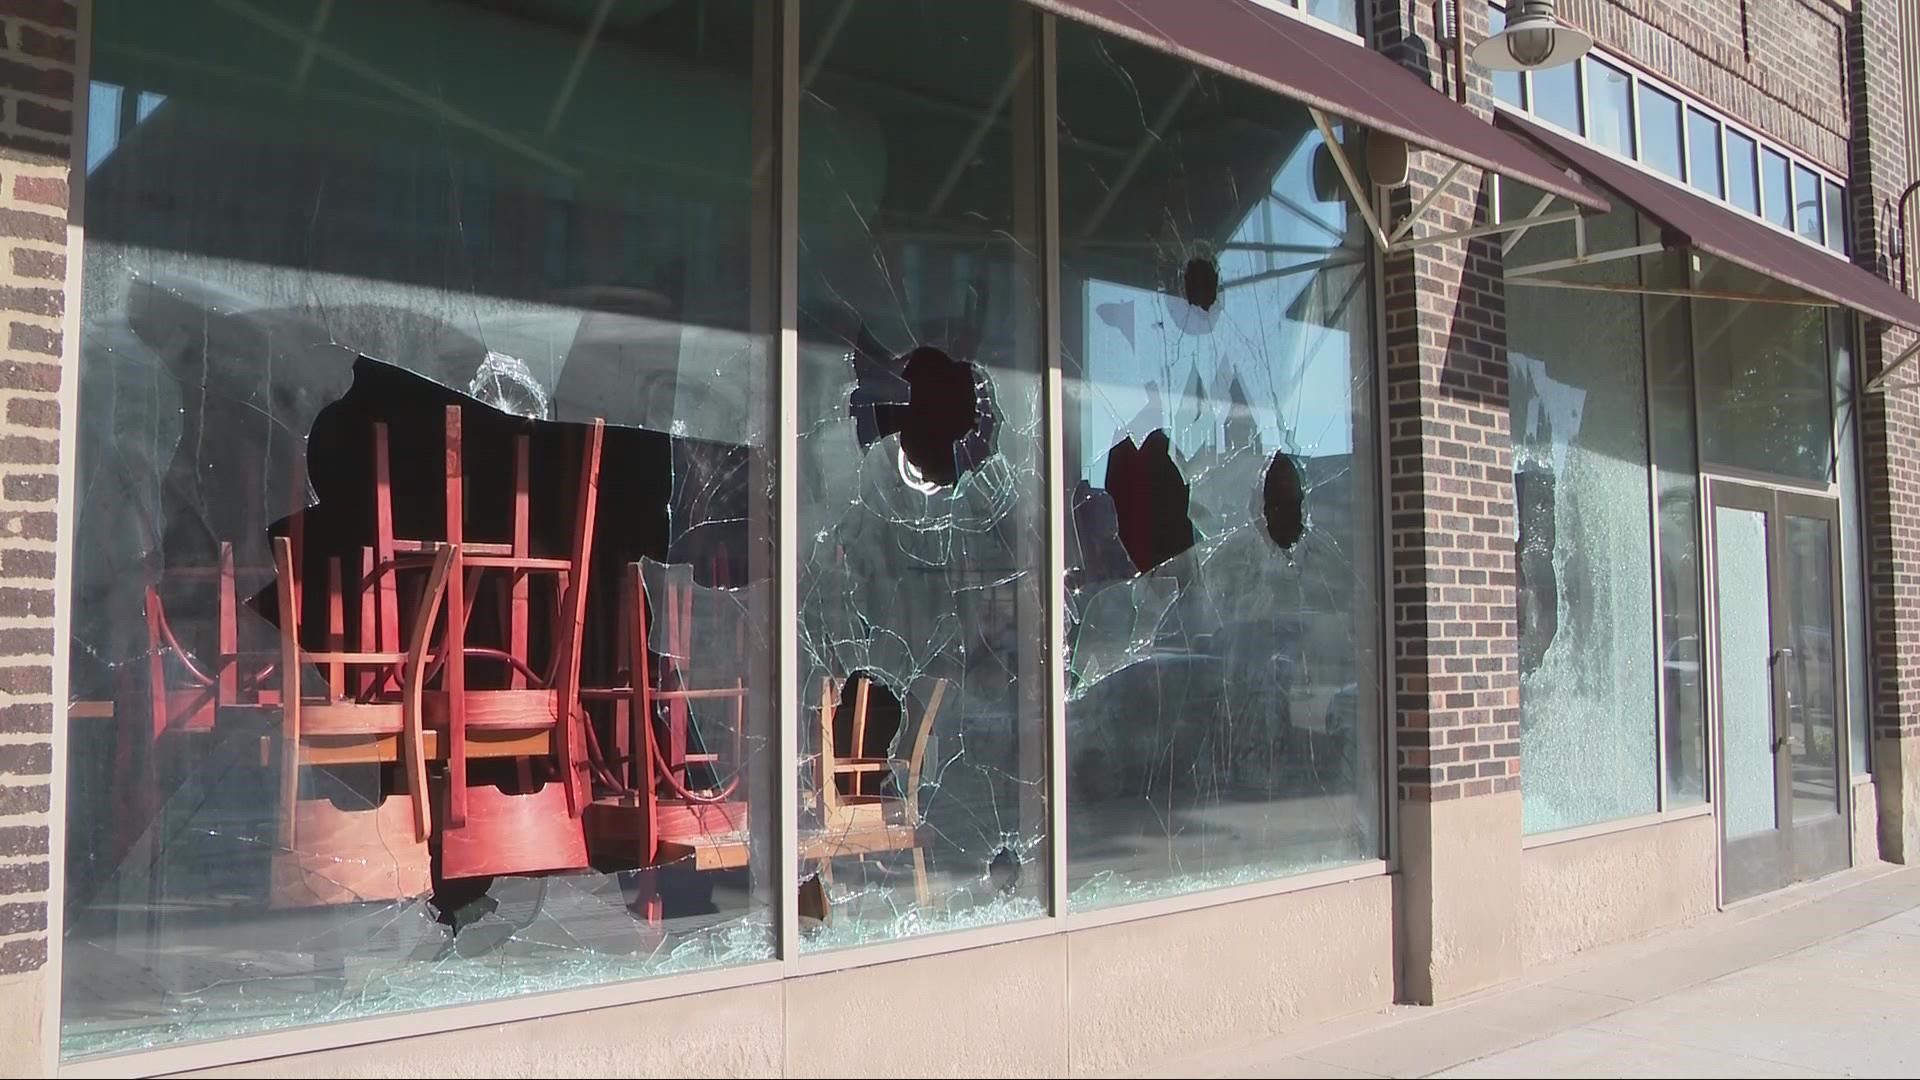 Peaceful demonstrations during the afternoon took a turn as the sun set, with officers deploying tear gas and several businesses having their windows smashed.